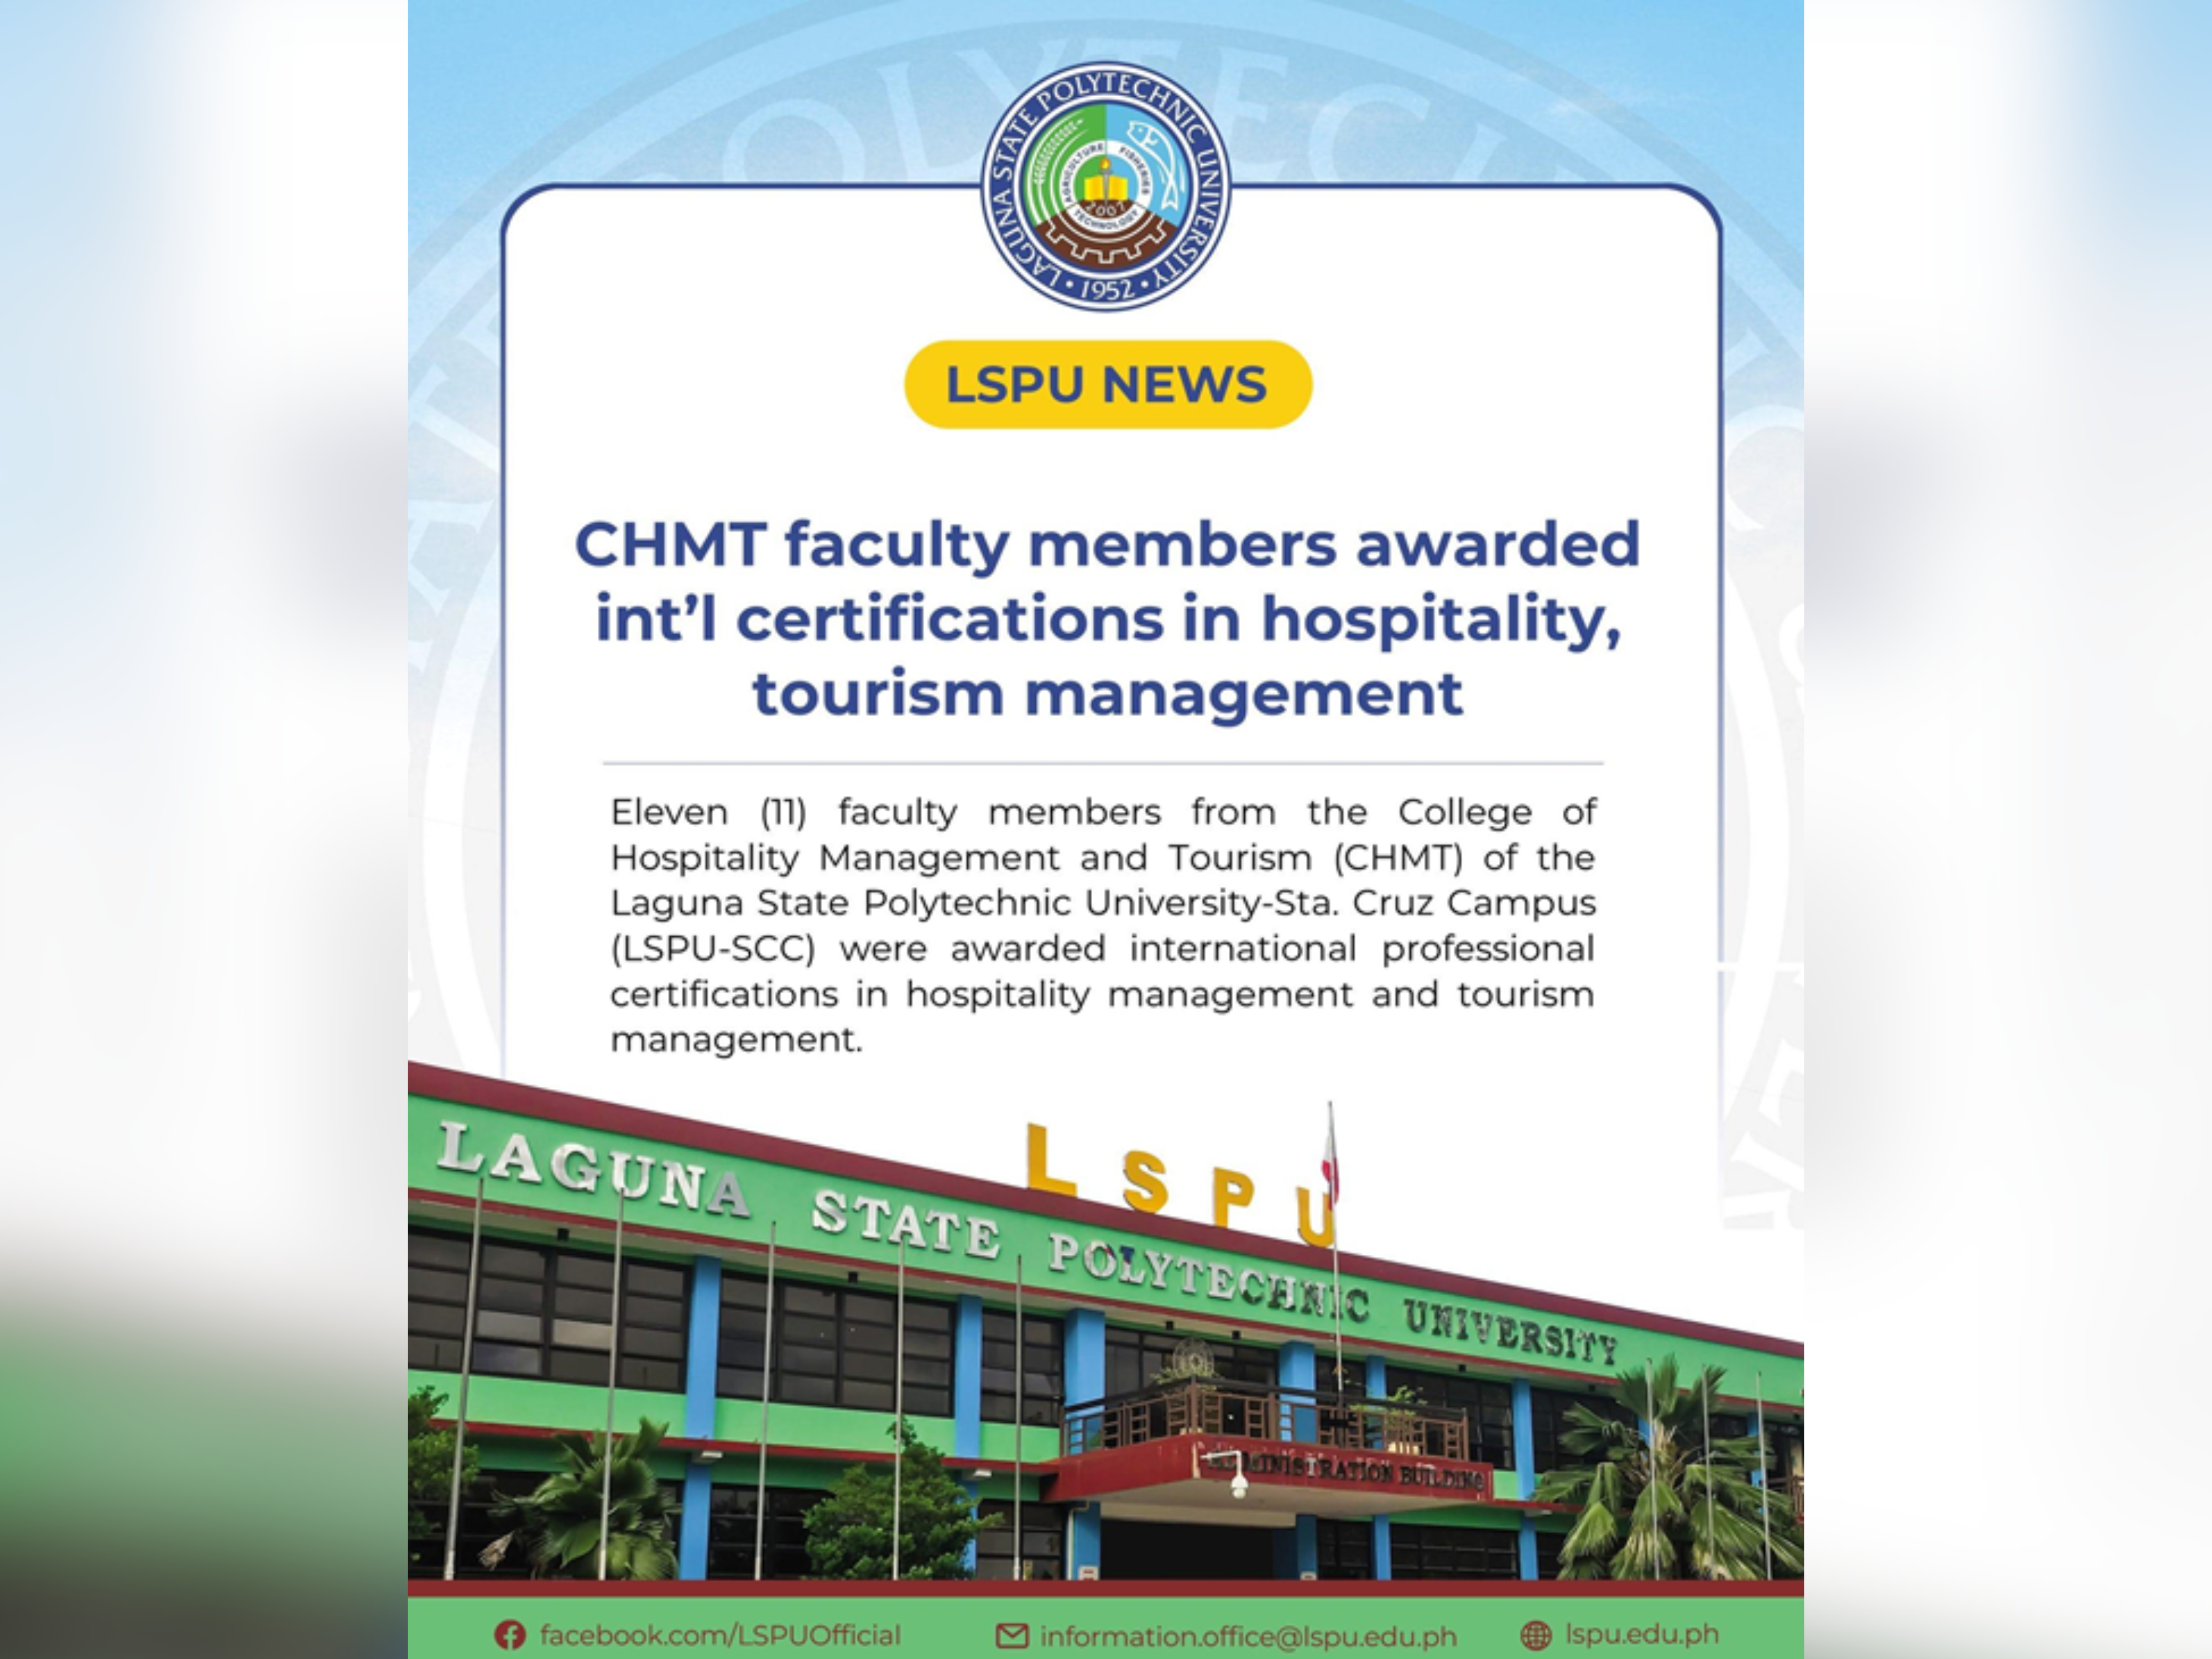 CHMT faculty members awarded int'l certifications in hospitality, tourism